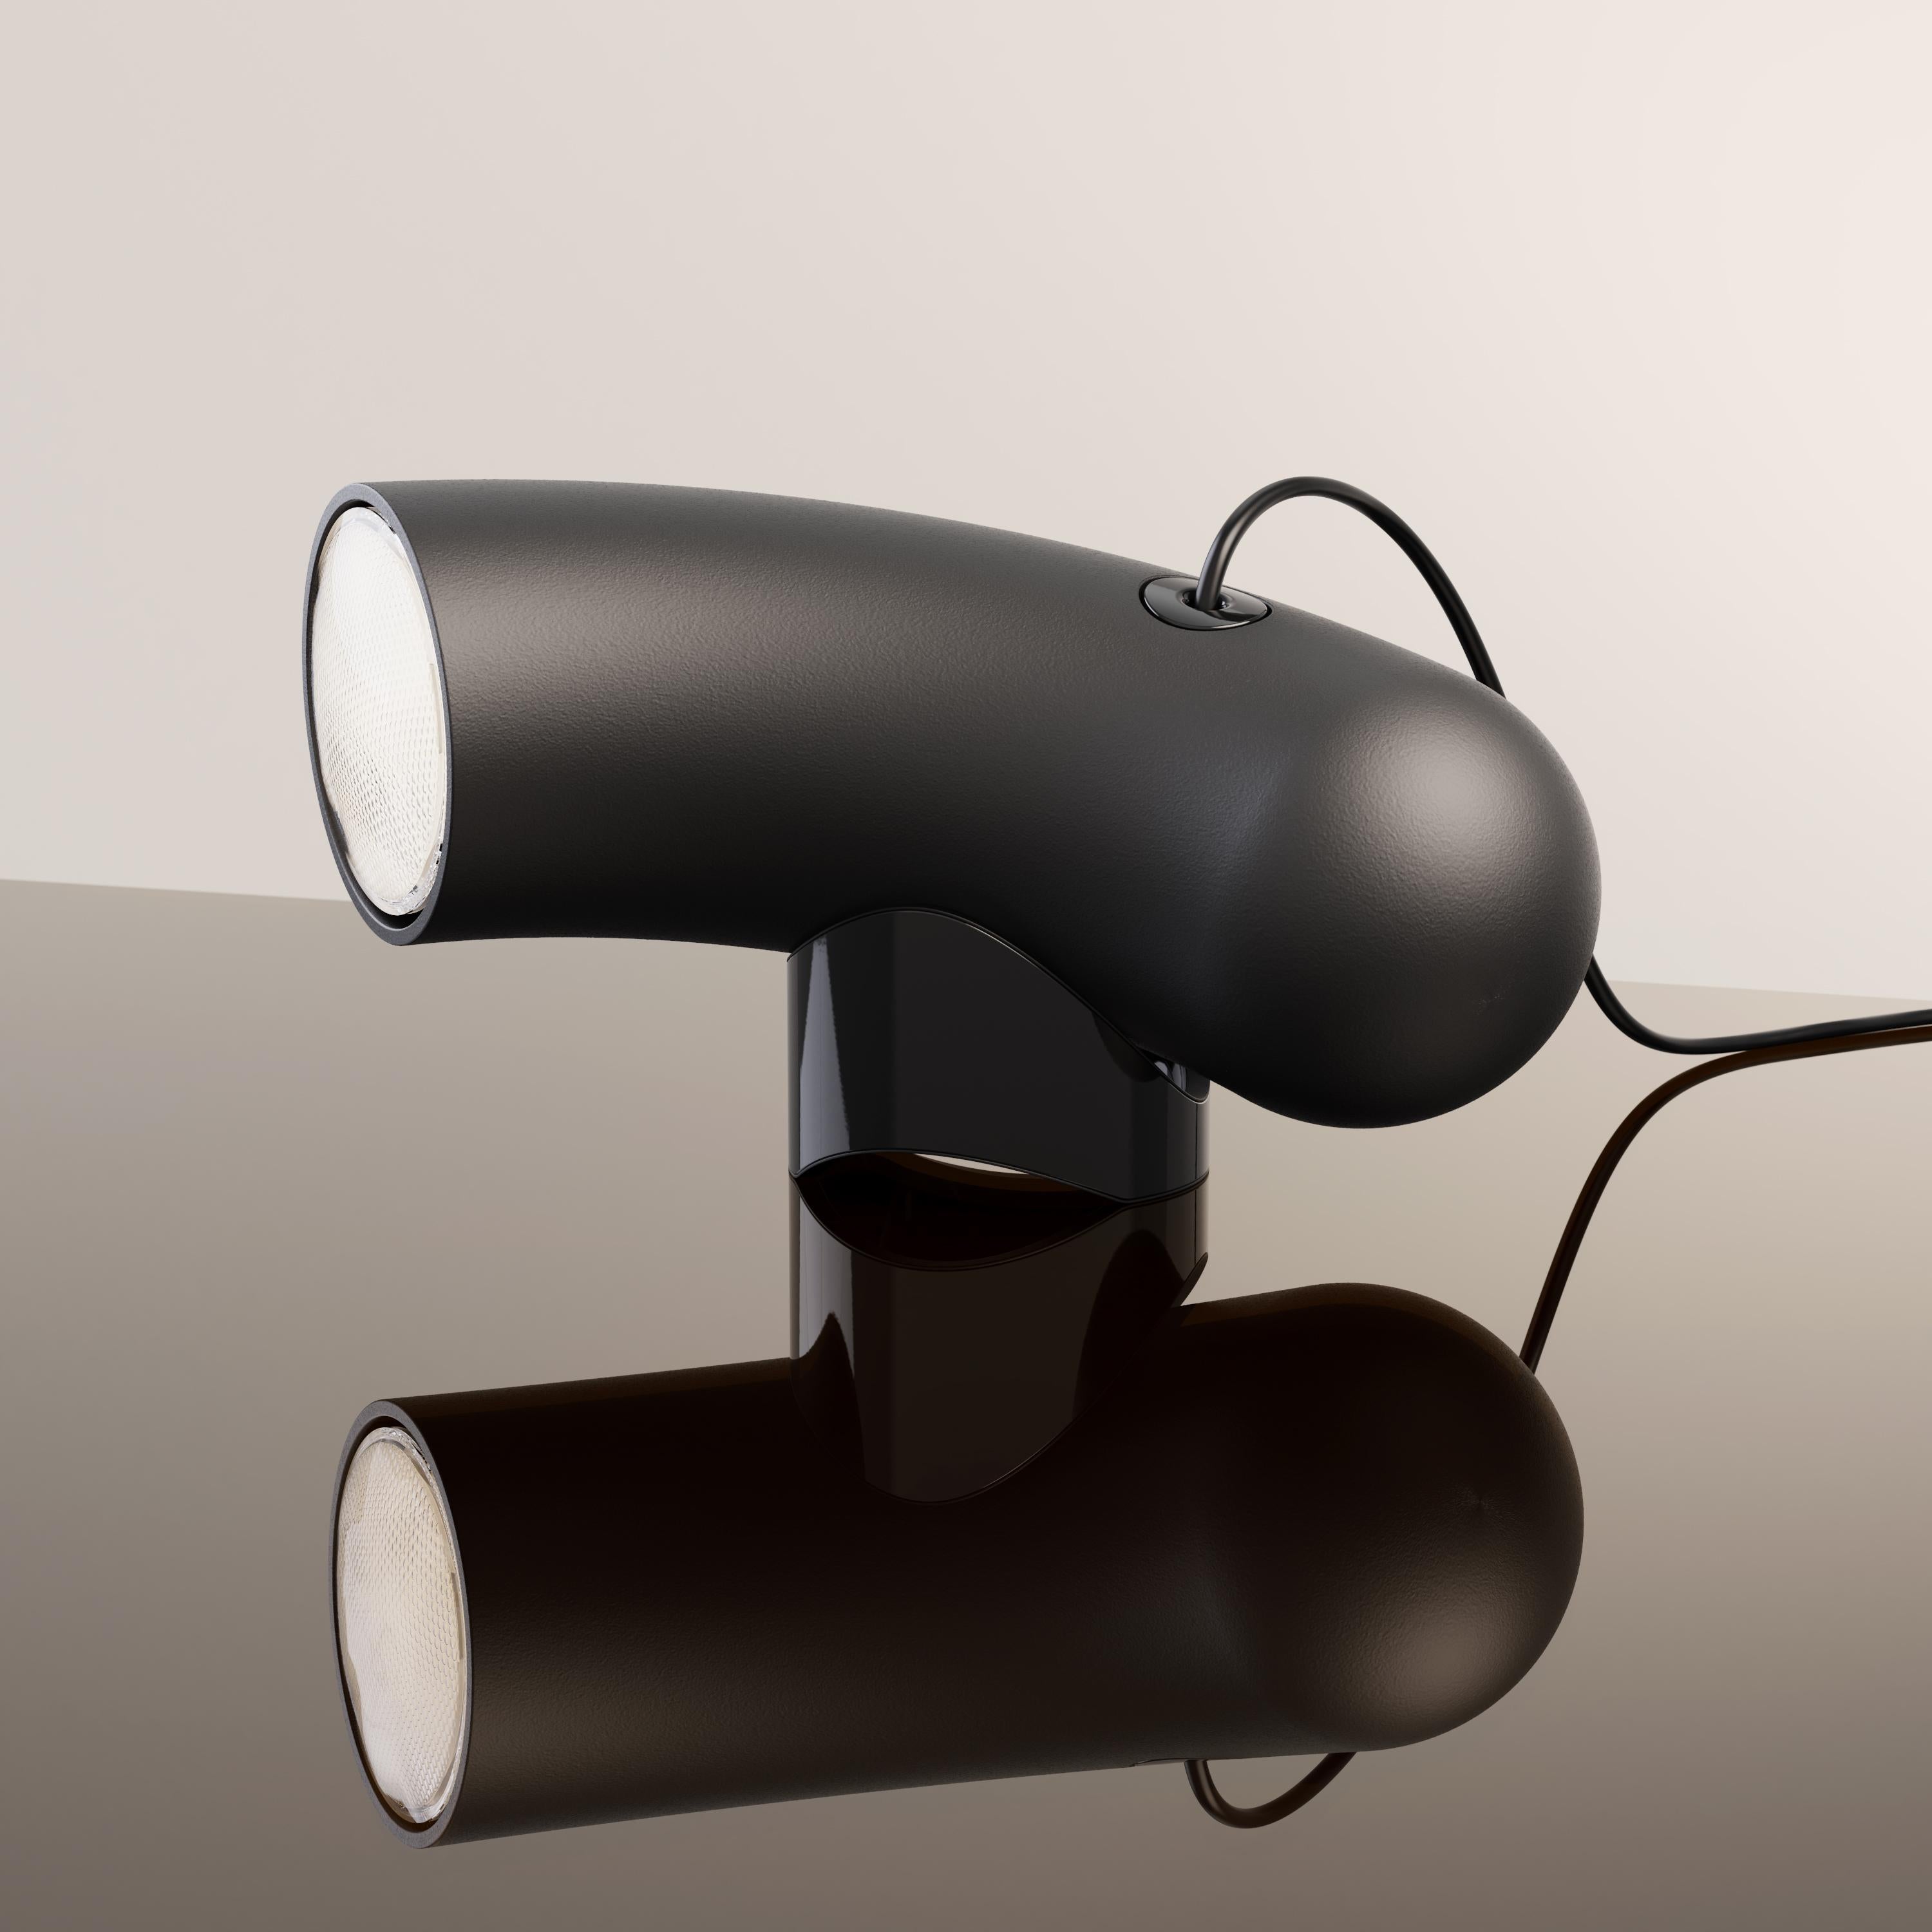 Sandy black Hyphen Simple table lamp by Studio d'Armes
Dimensions: D 11 x W 32 x H 15 cm
Materials: Sanded black cast steel.
Available in steel sandy black, steel chromatic black, natural porcelain and steel custom.

Derived from the ancient